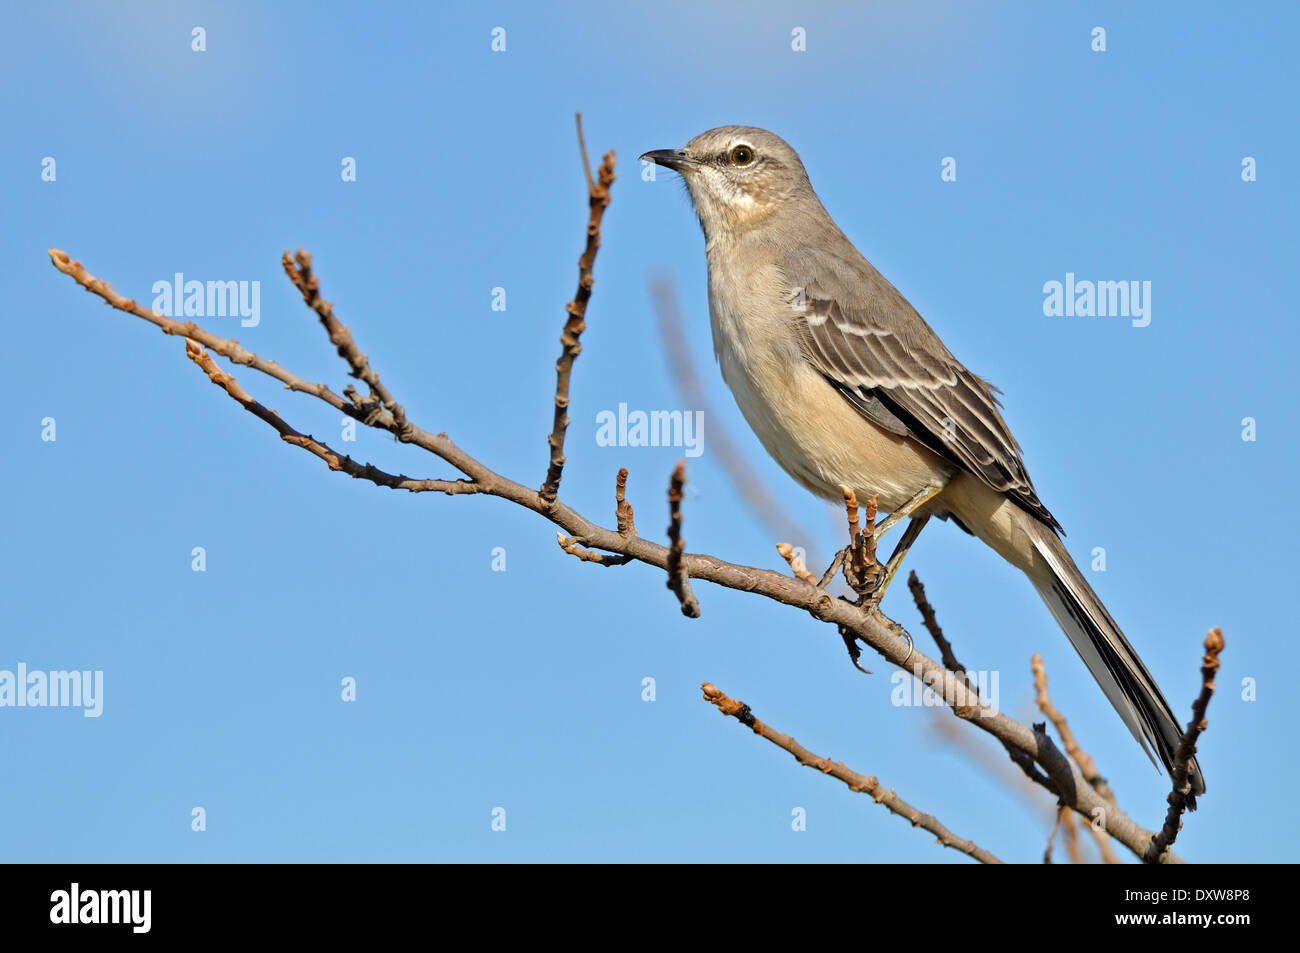 Northern Mockingbird perched on a tree branch in Cape May Point State Park, New Jersey. Stock Photo